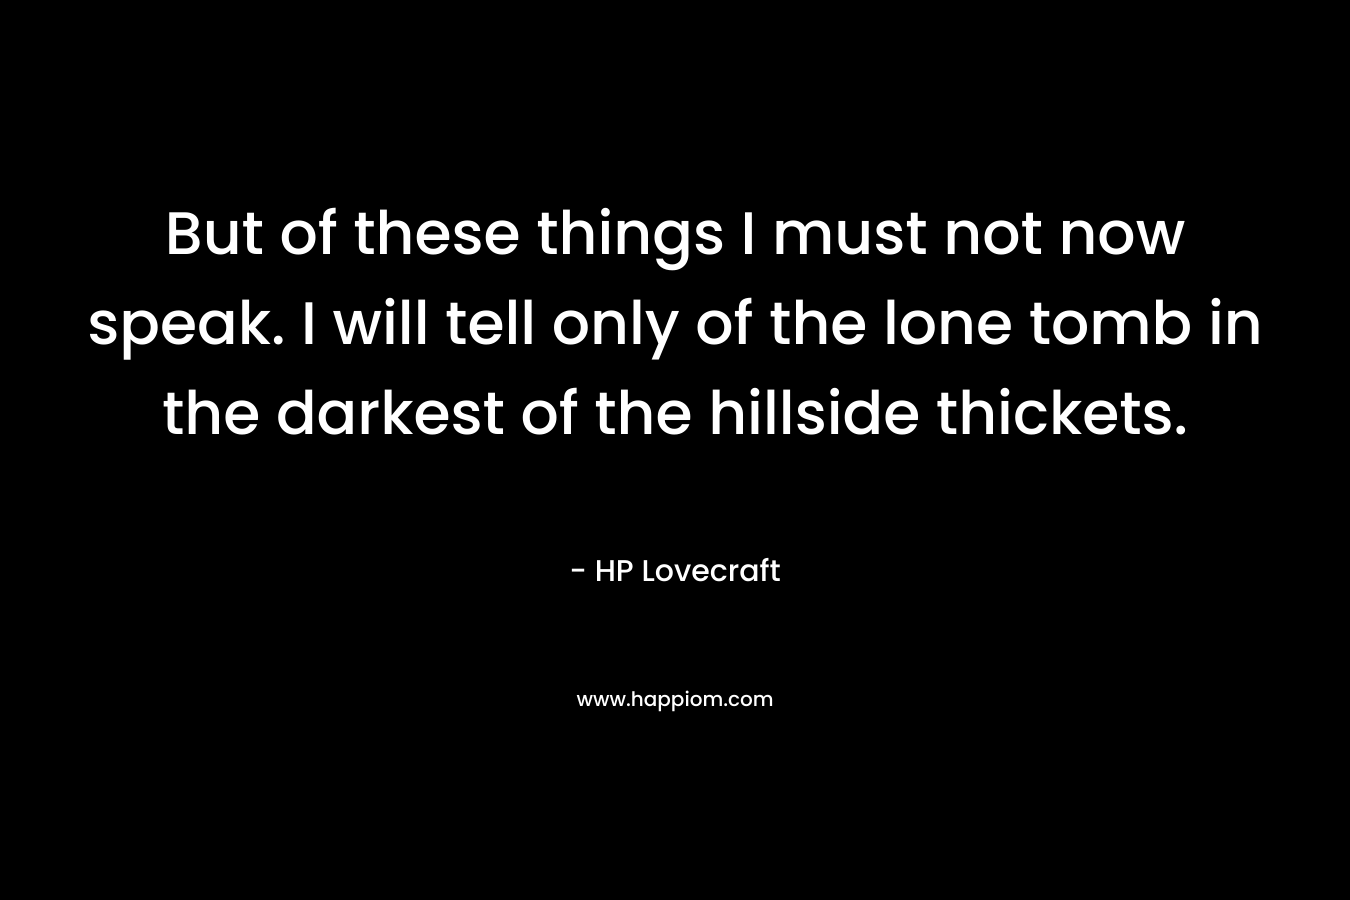 But of these things I must not now speak. I will tell only of the lone tomb in the darkest of the hillside thickets. – HP Lovecraft